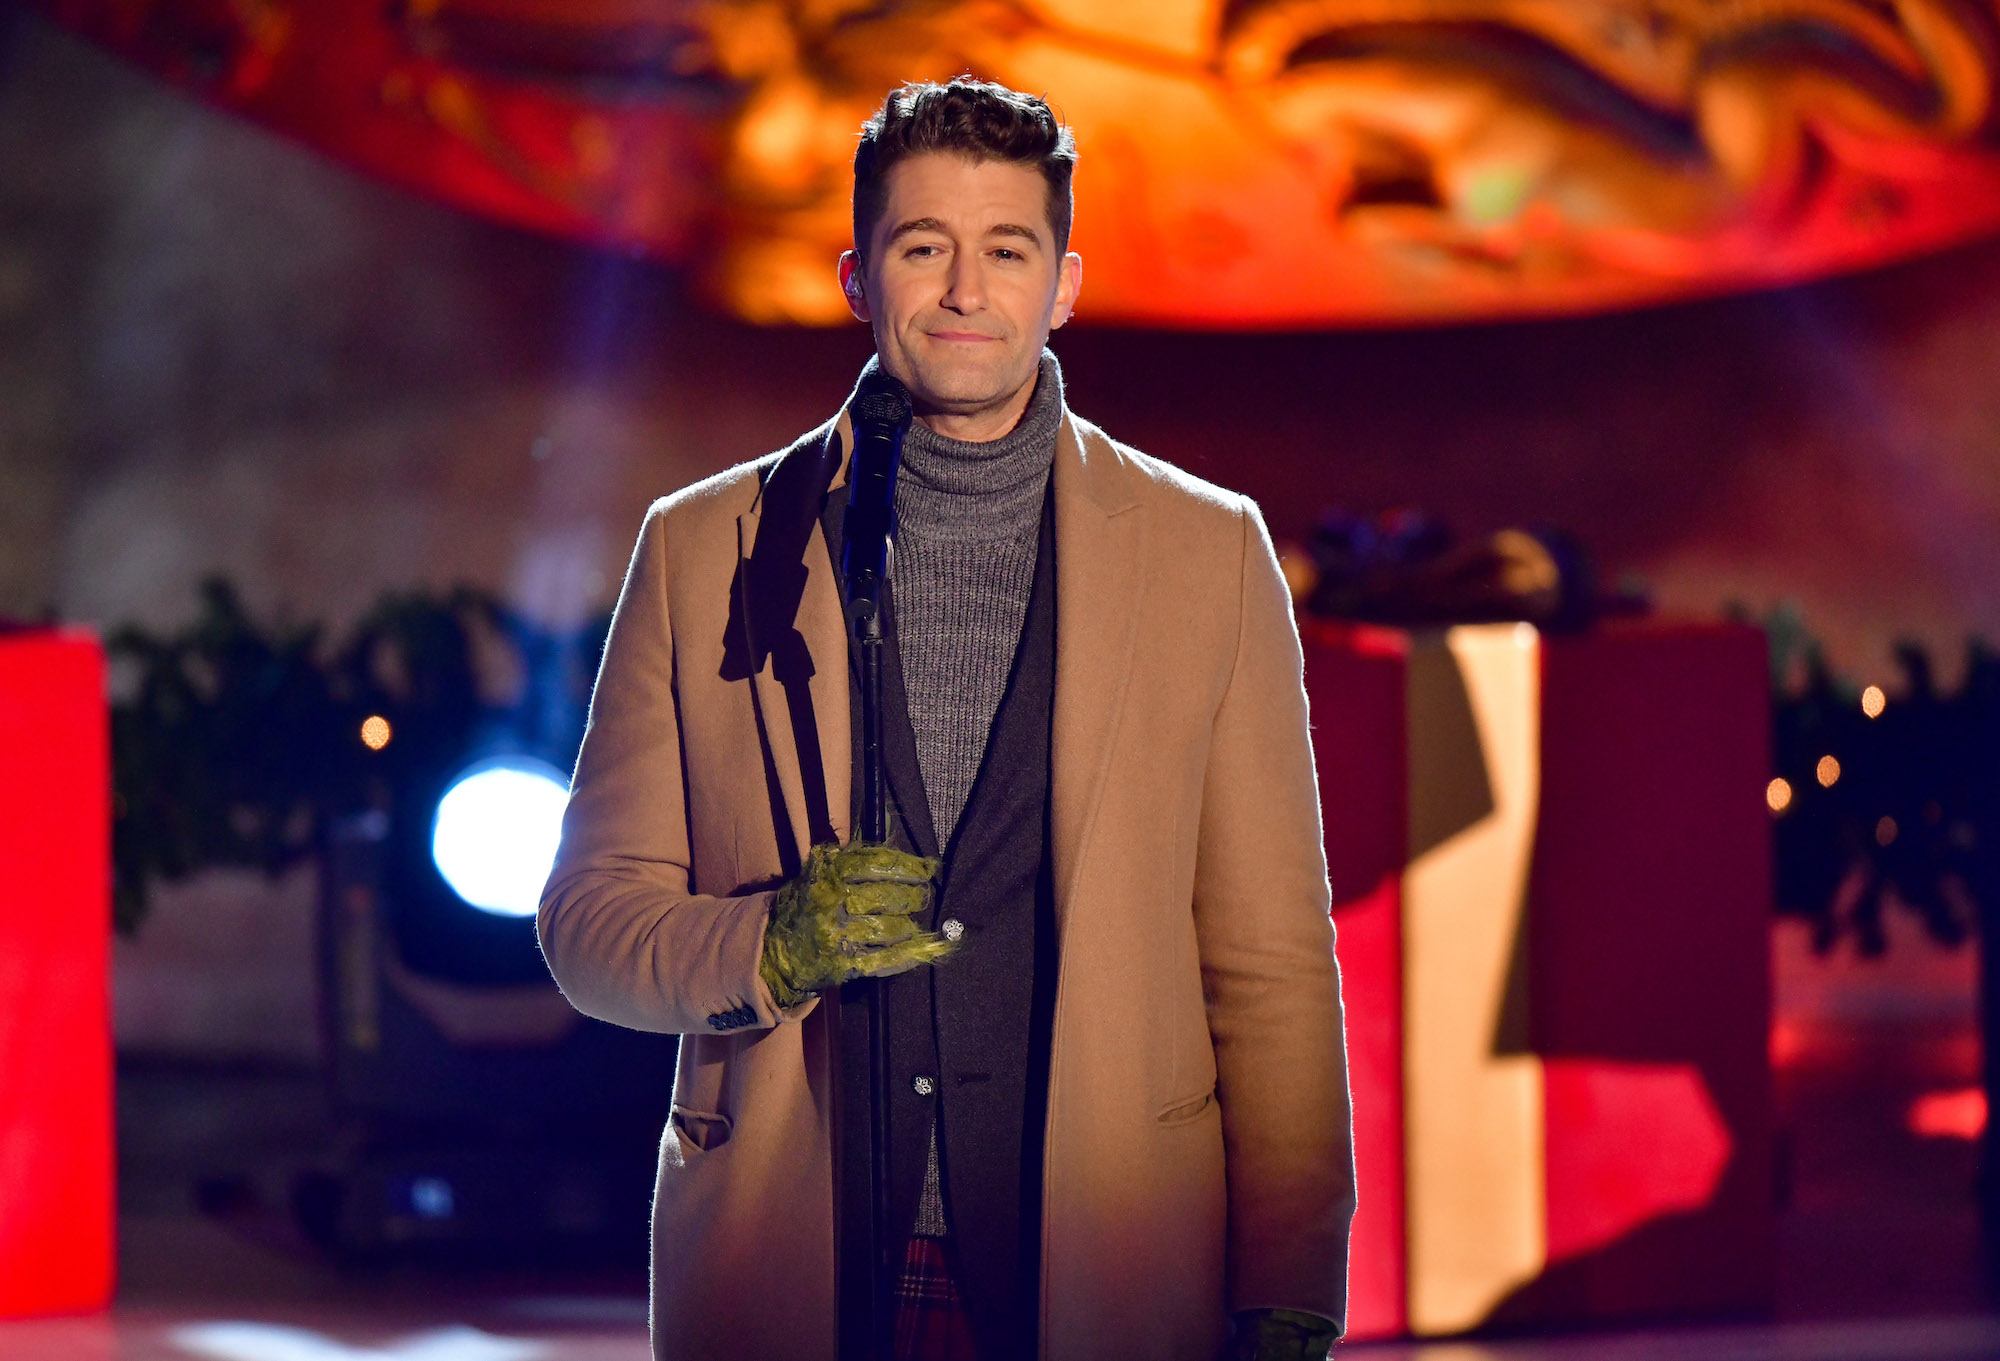 Matthew Morrison performs at the 88th Annual Rockefeller Center Christmas Tree Lighting on Dec. 1, 2020